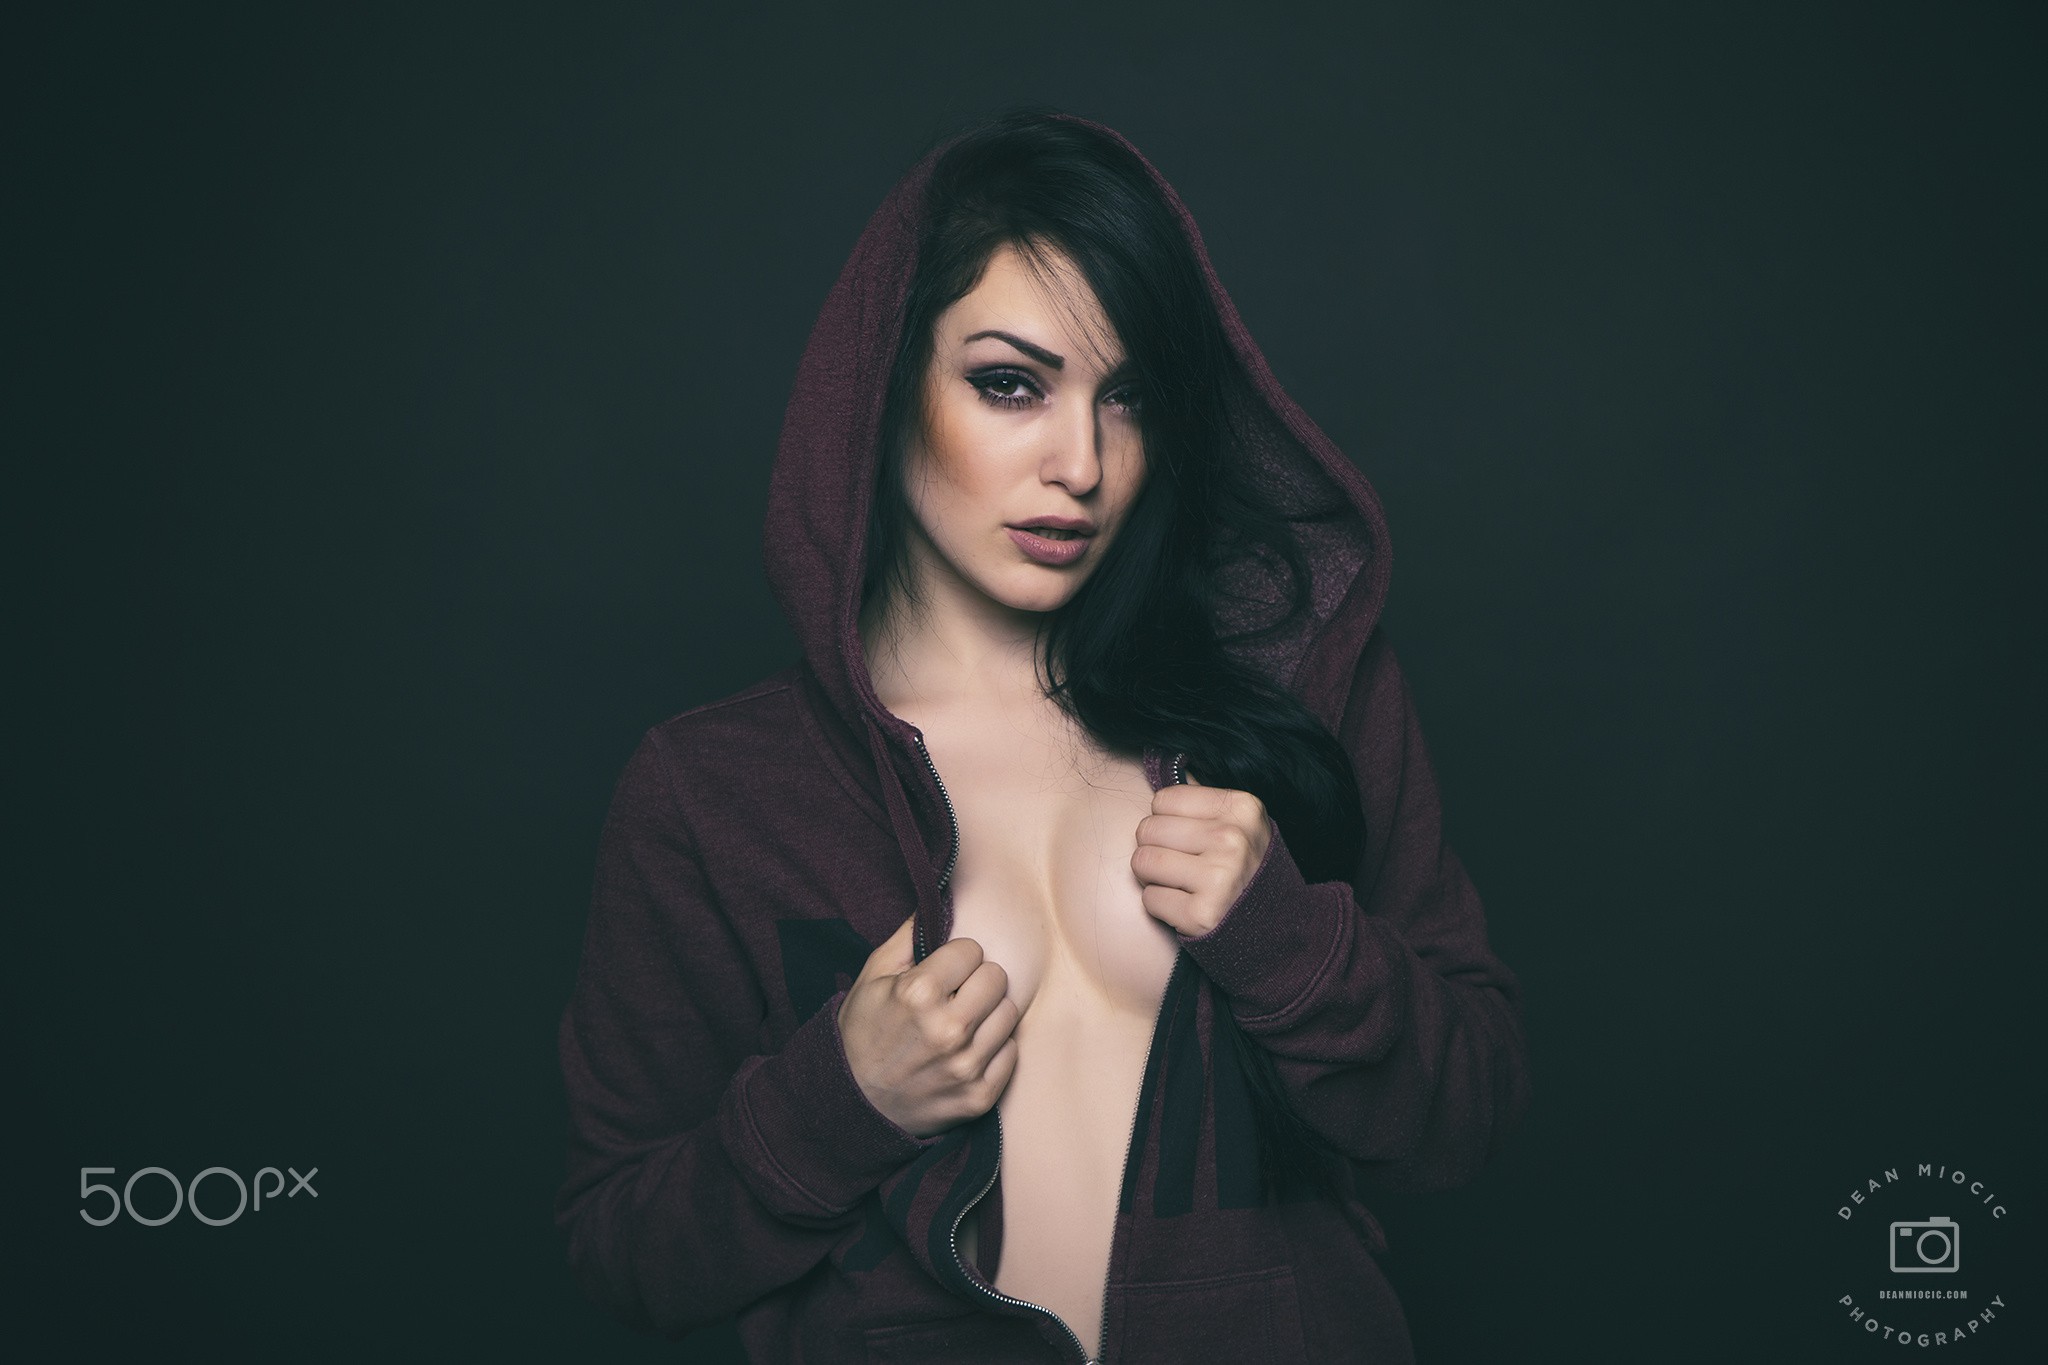 People 2048x1365 women hoods face portrait simple background black hair 500px open shirt cleavage dark background boobs long hair